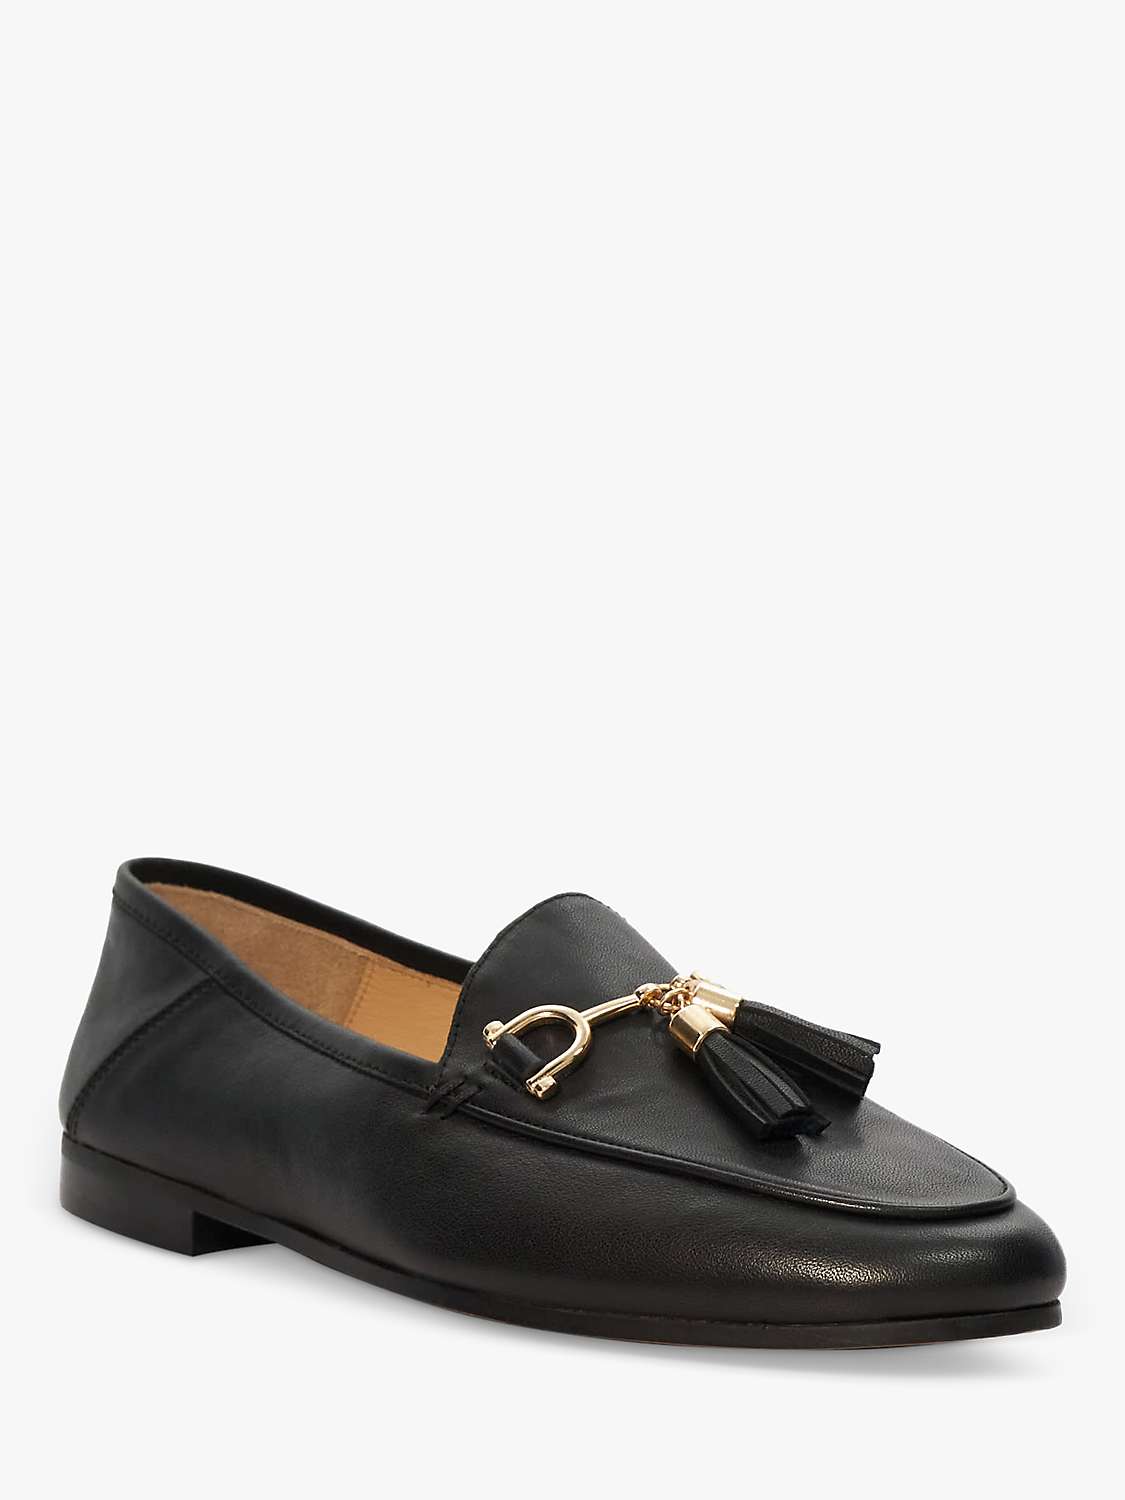 Buy Dune Graysons Leather Flexible Sole Tassel Loafers, Black Online at johnlewis.com